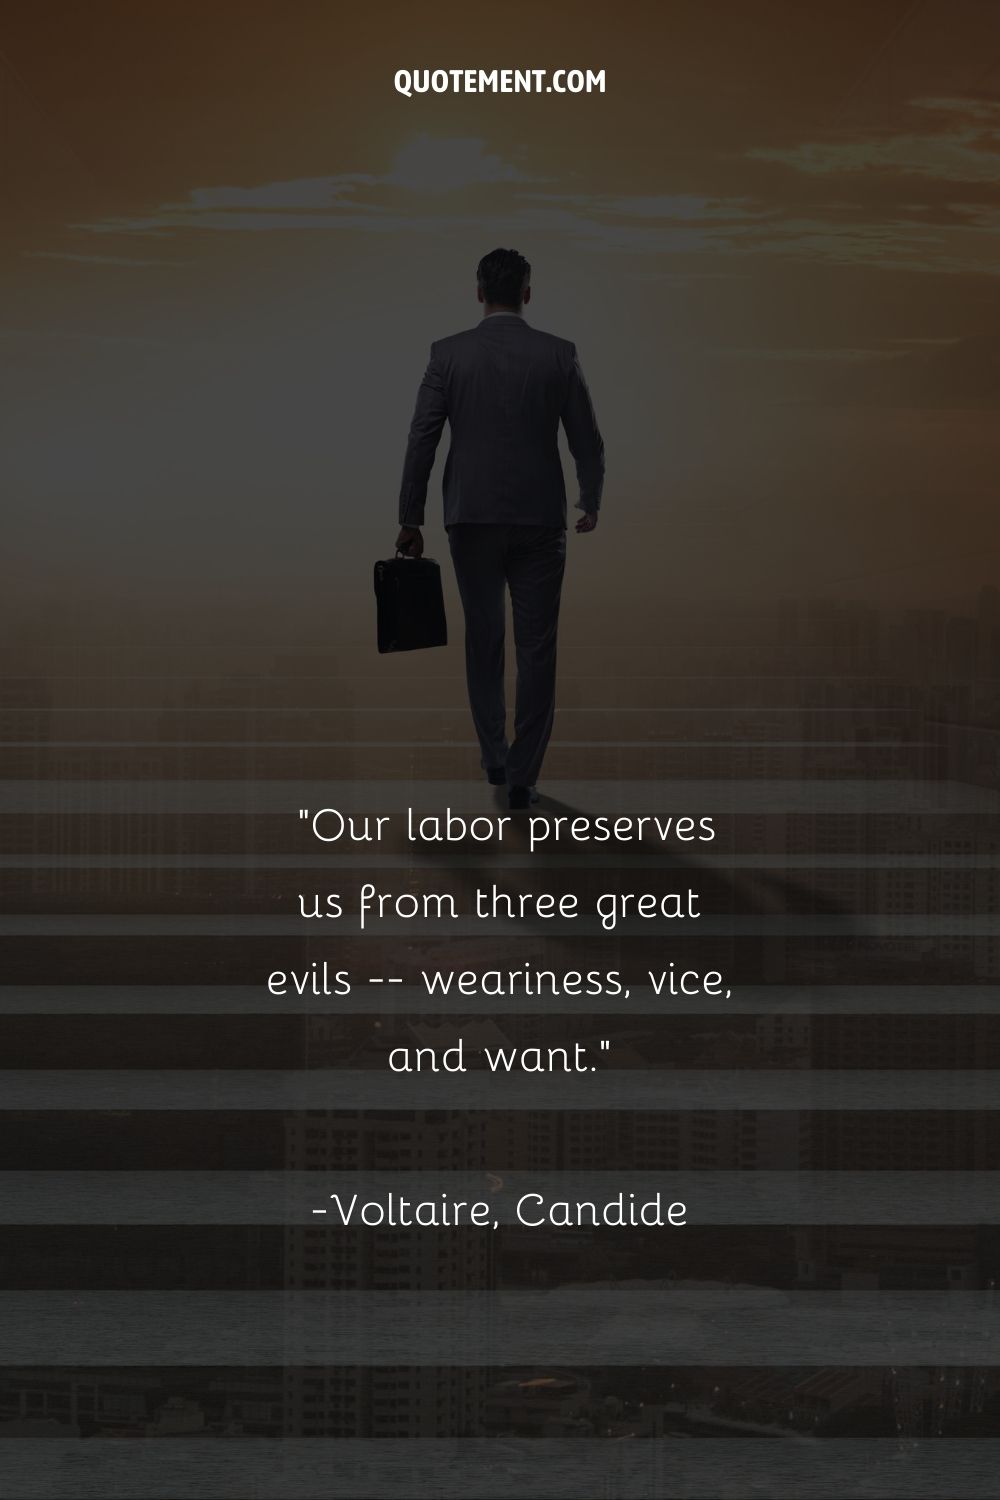 Our labor preserves us from three great evils -- weariness, vice, and want